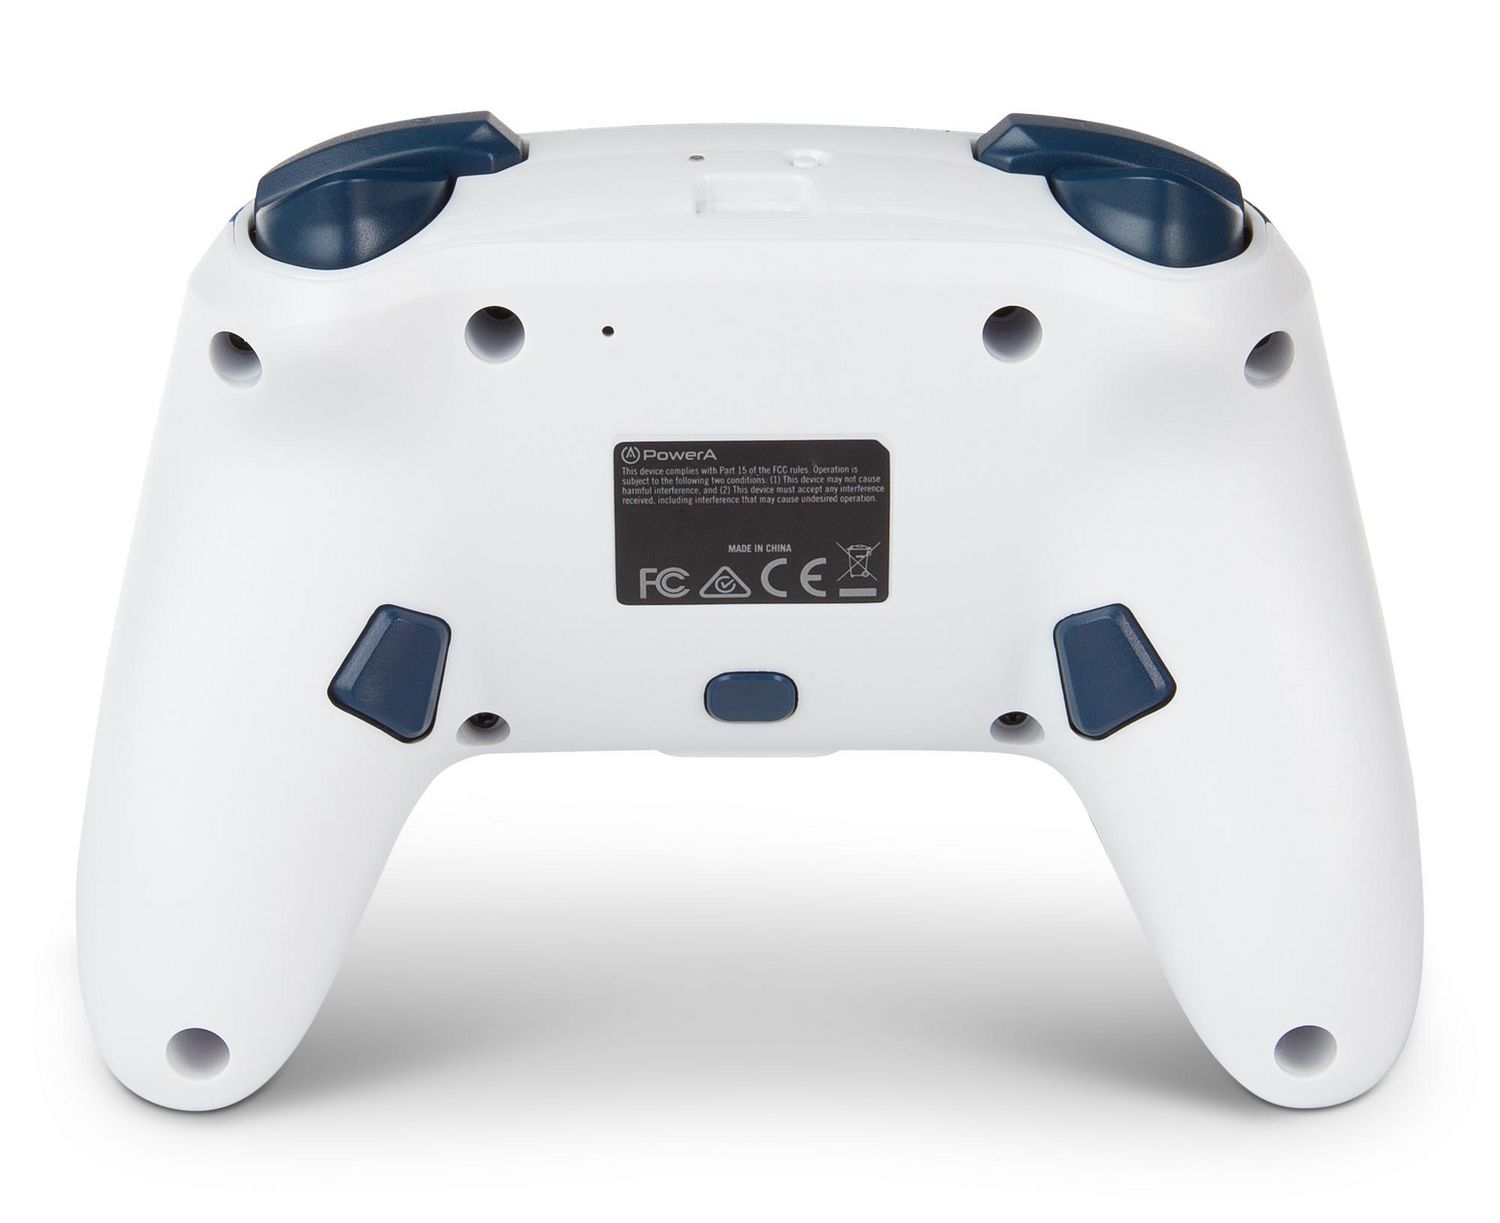 PowerA Enhanced Wireless Controller and Protection Case for 